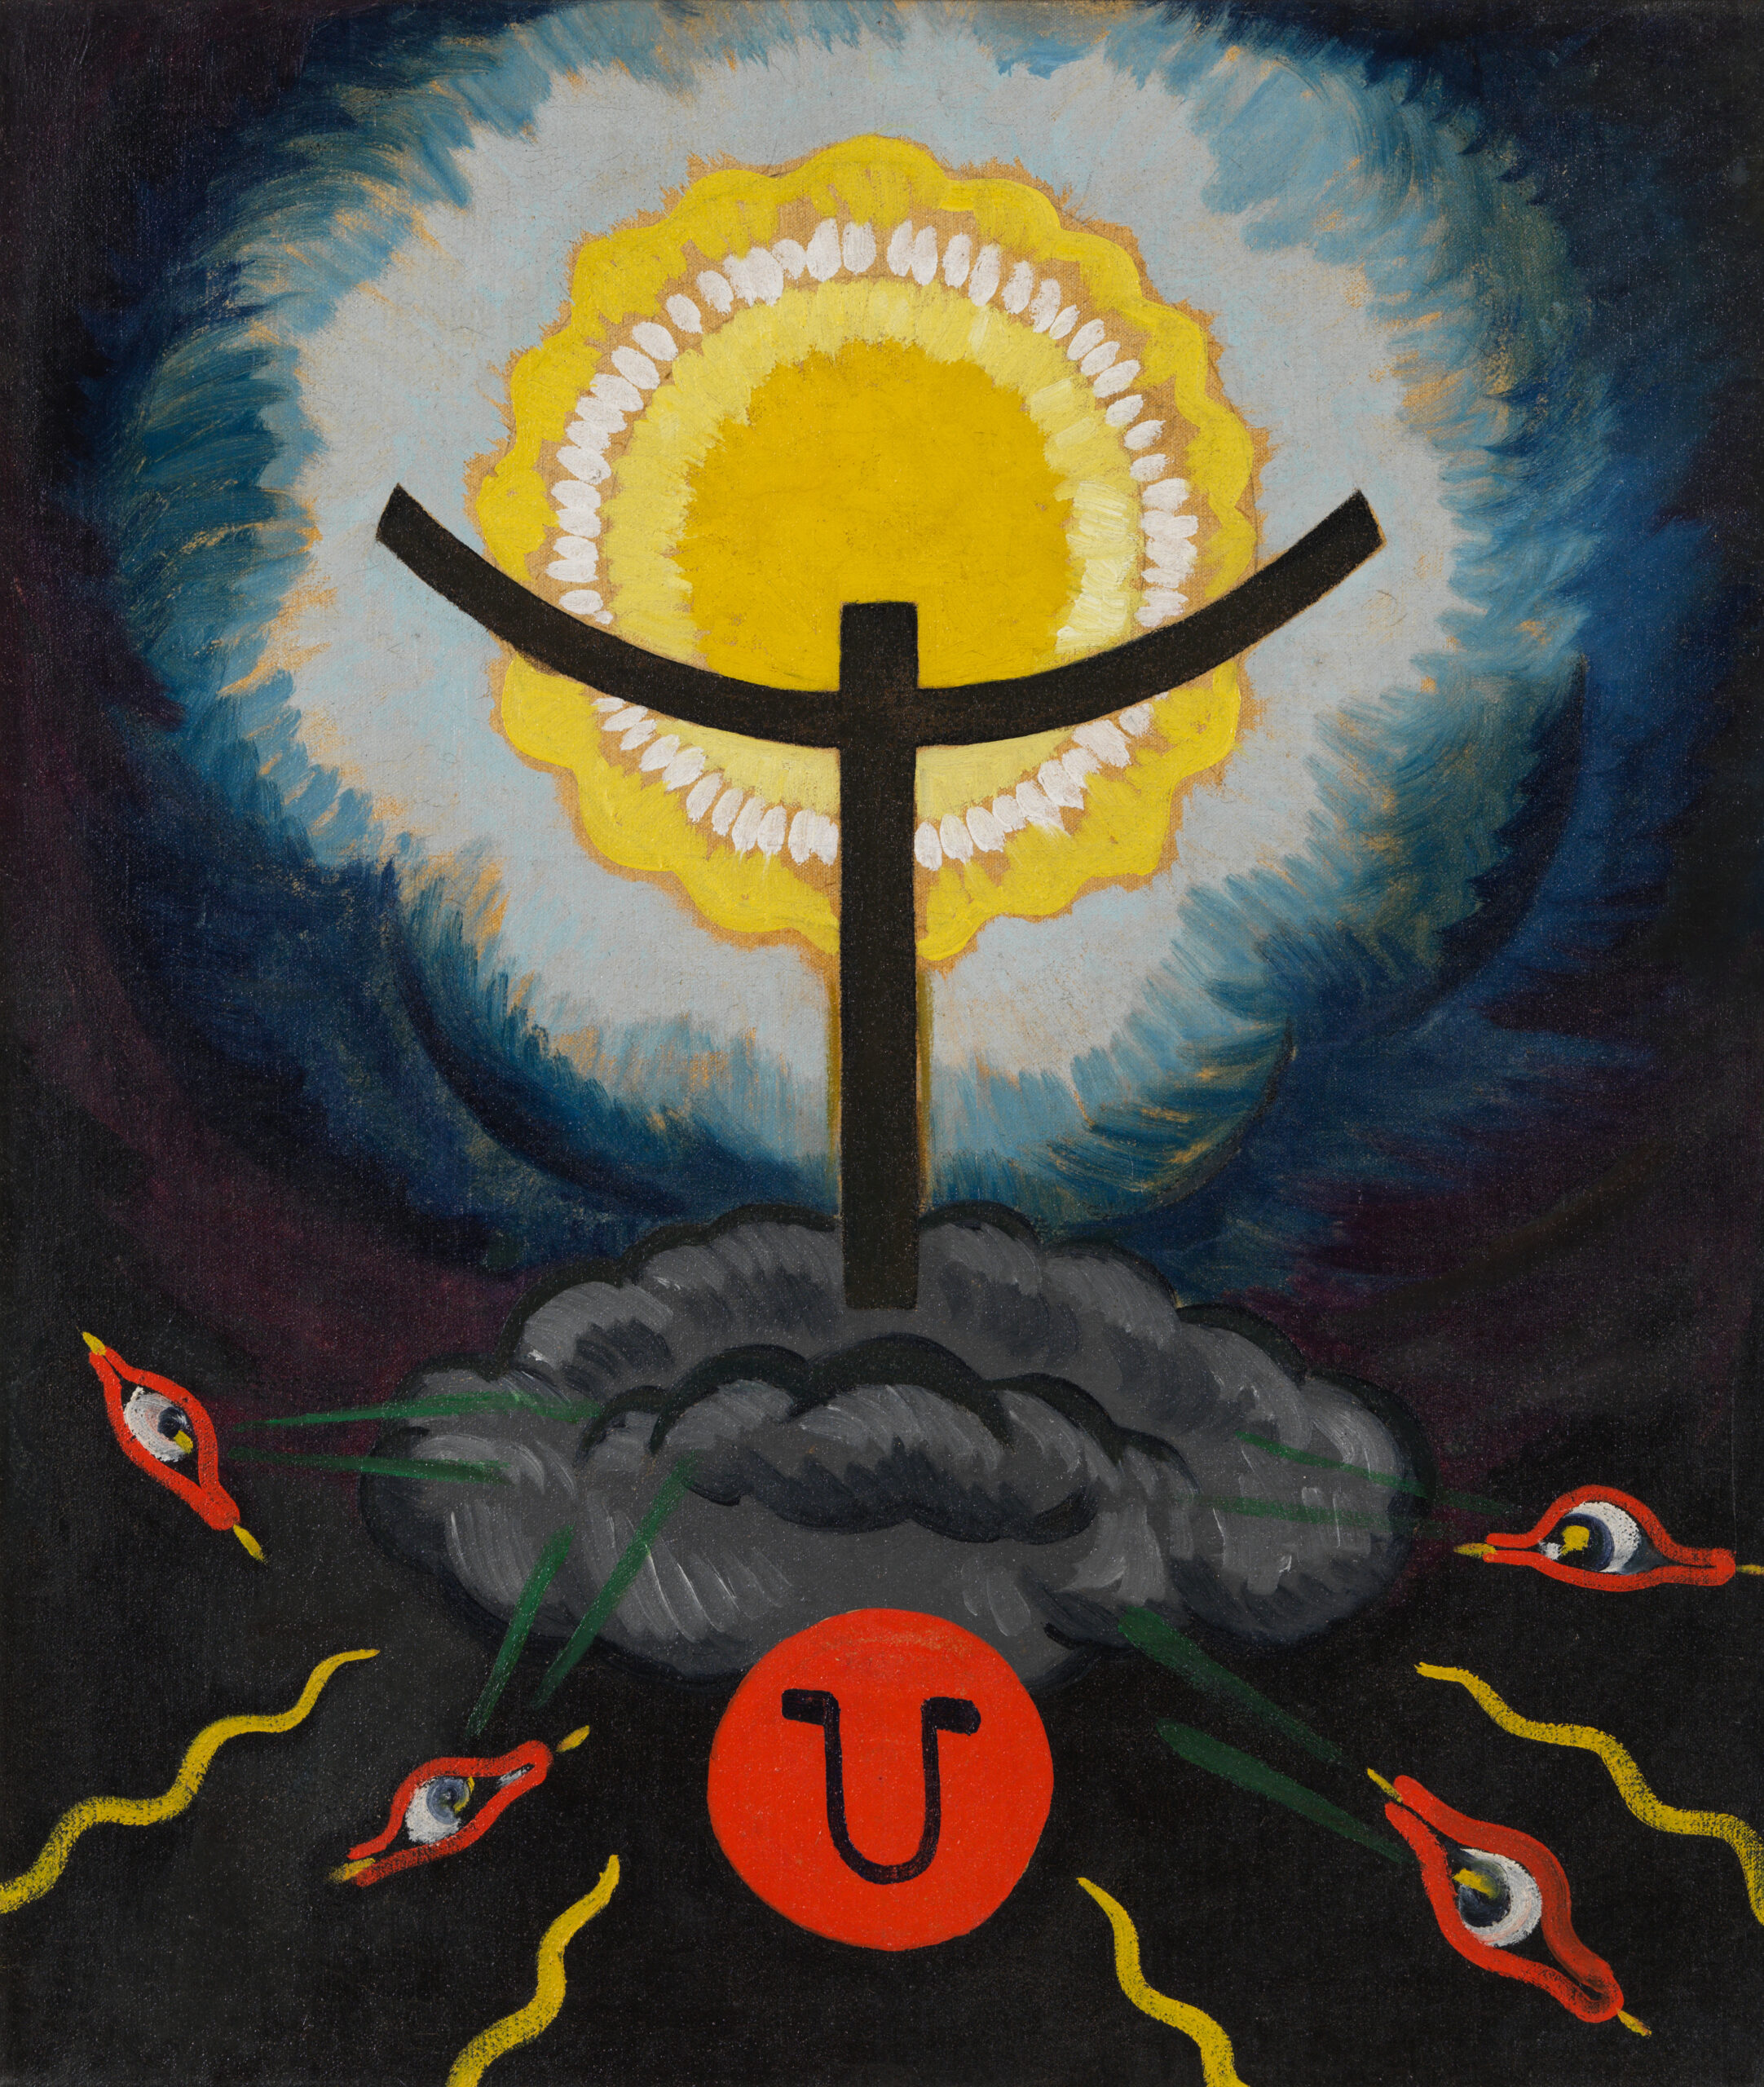 A black cross on a cloud in front of a yellow moon and a crowd of red eyes.